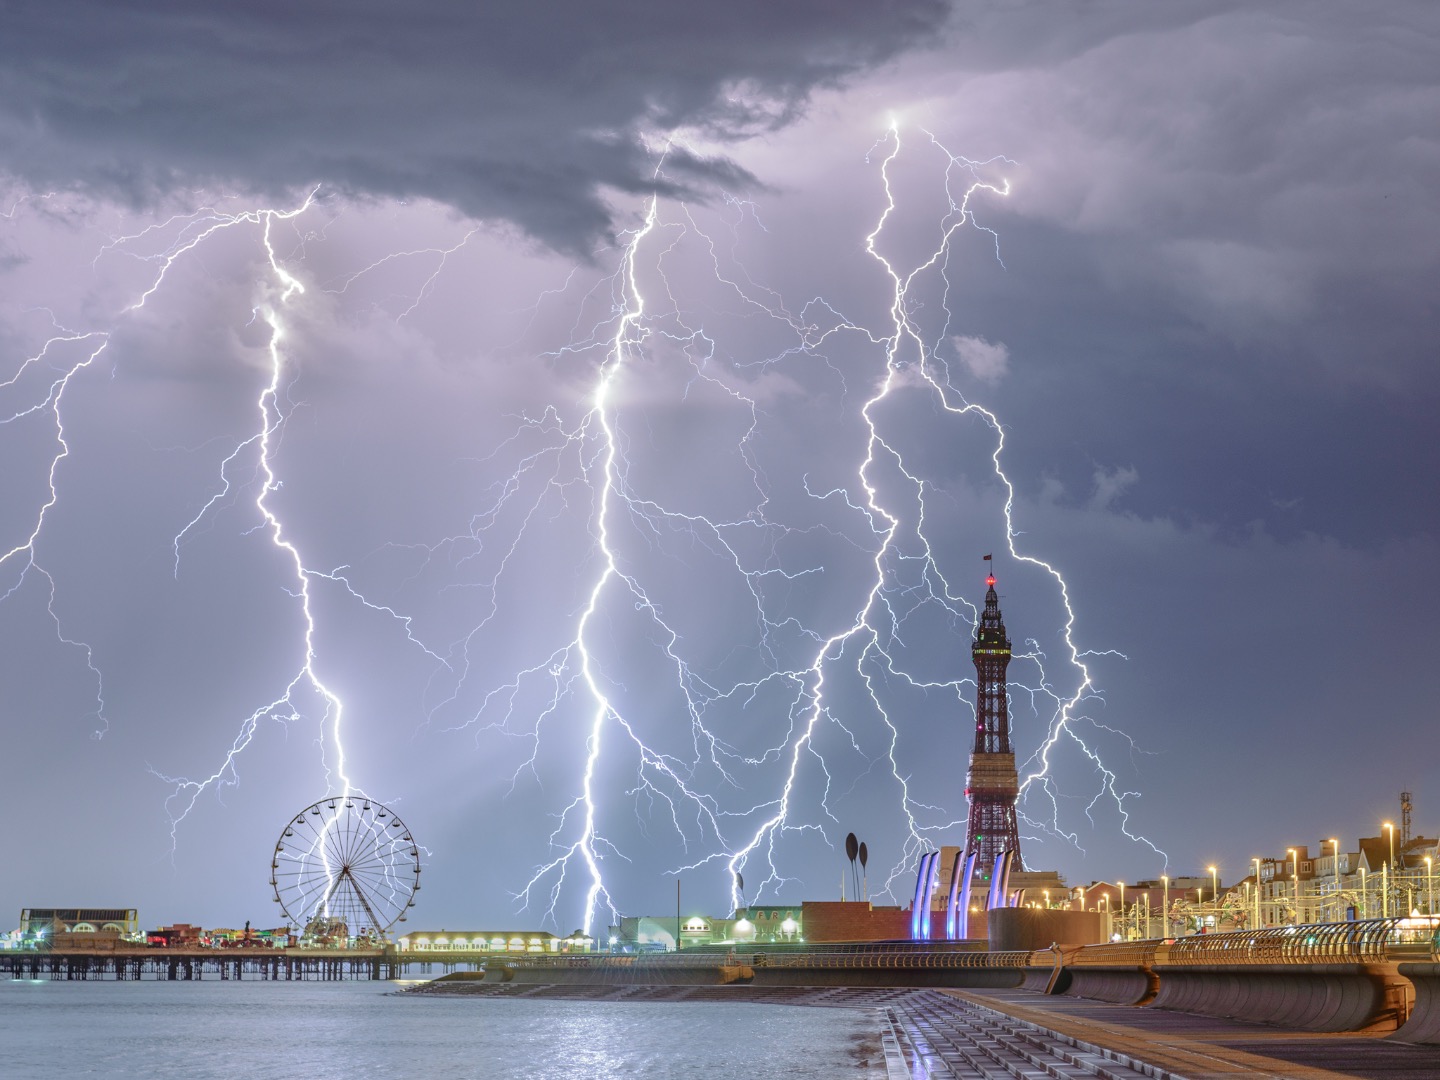 Electric Blackpool by Stephen Cheatley